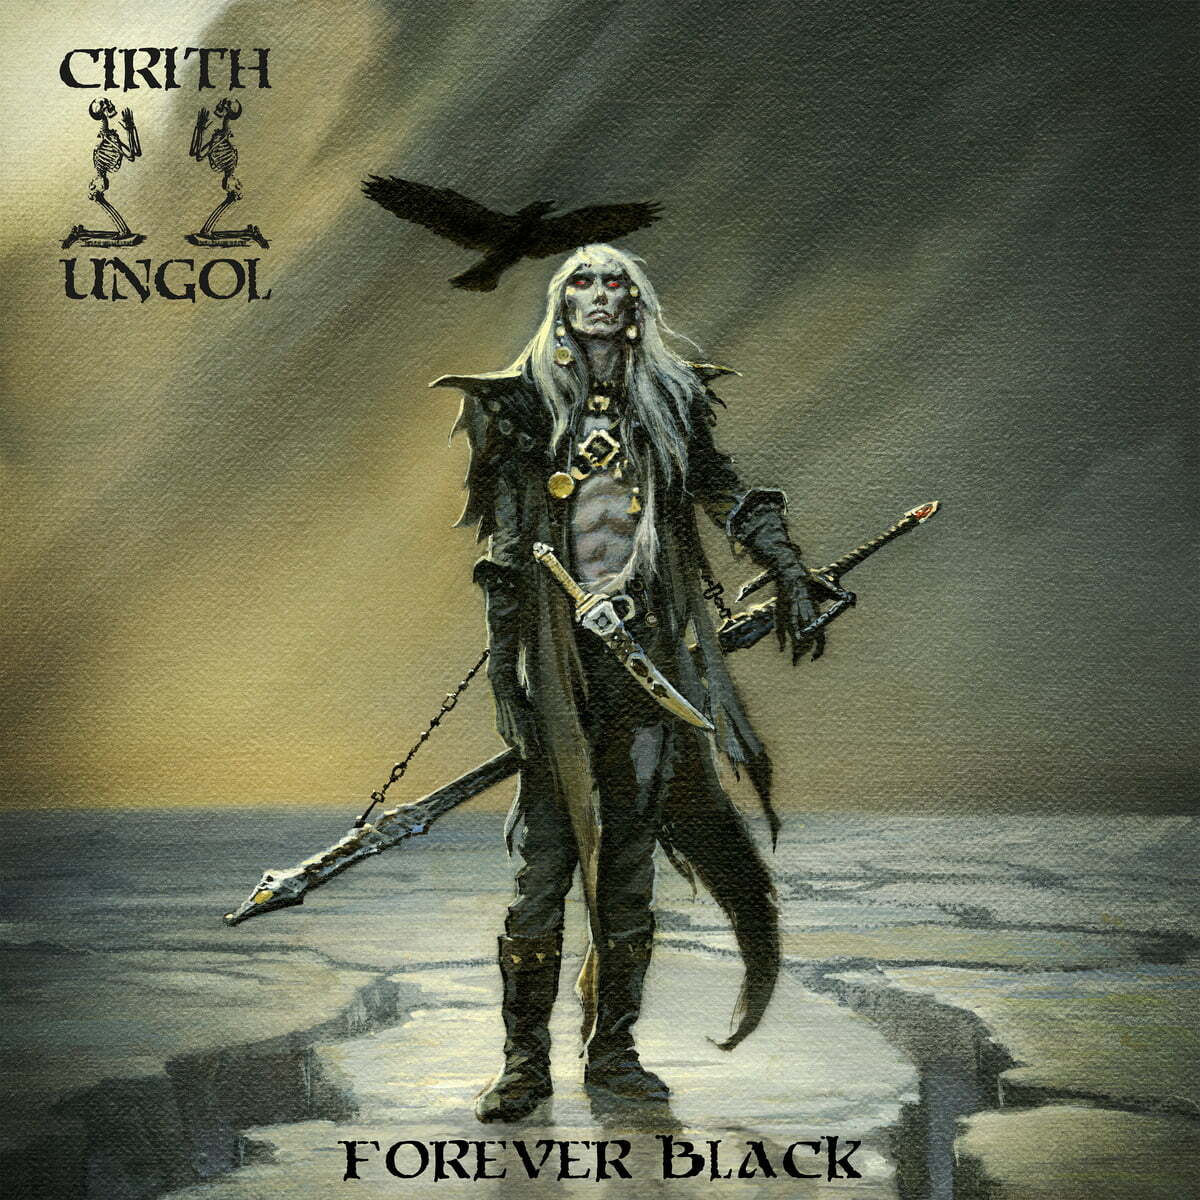 RT @MetalBlade: LEGIONS! The mighty @CirithU celebrate the first year of #ForeverBlack 🗡️ today! A monster of a comeback album a…